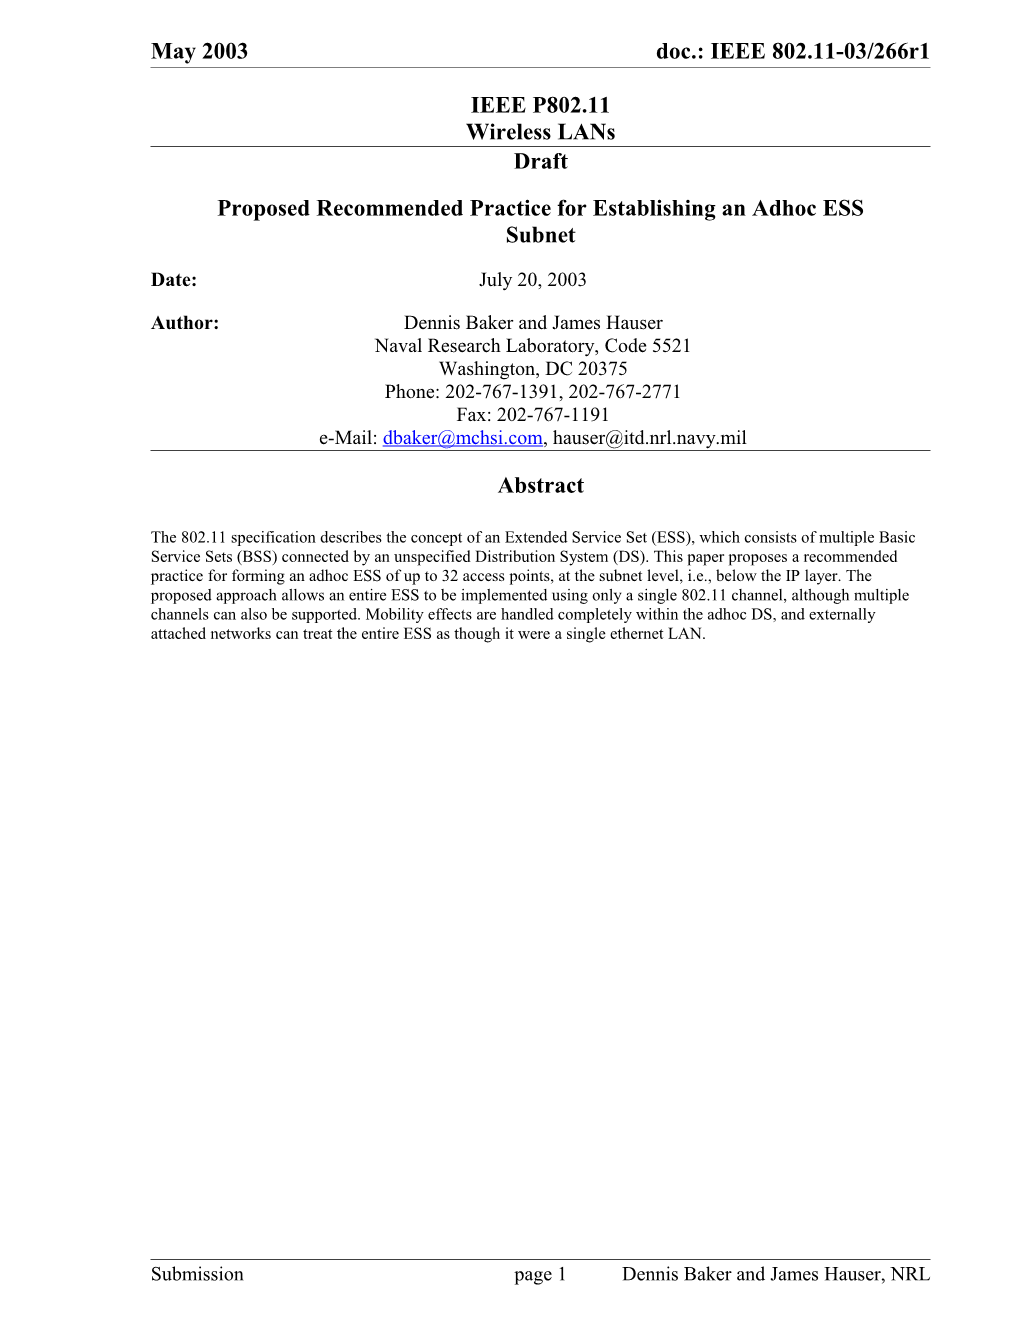 Proposed Recommended Practice for Establishing an Adhoc ESS Subnet